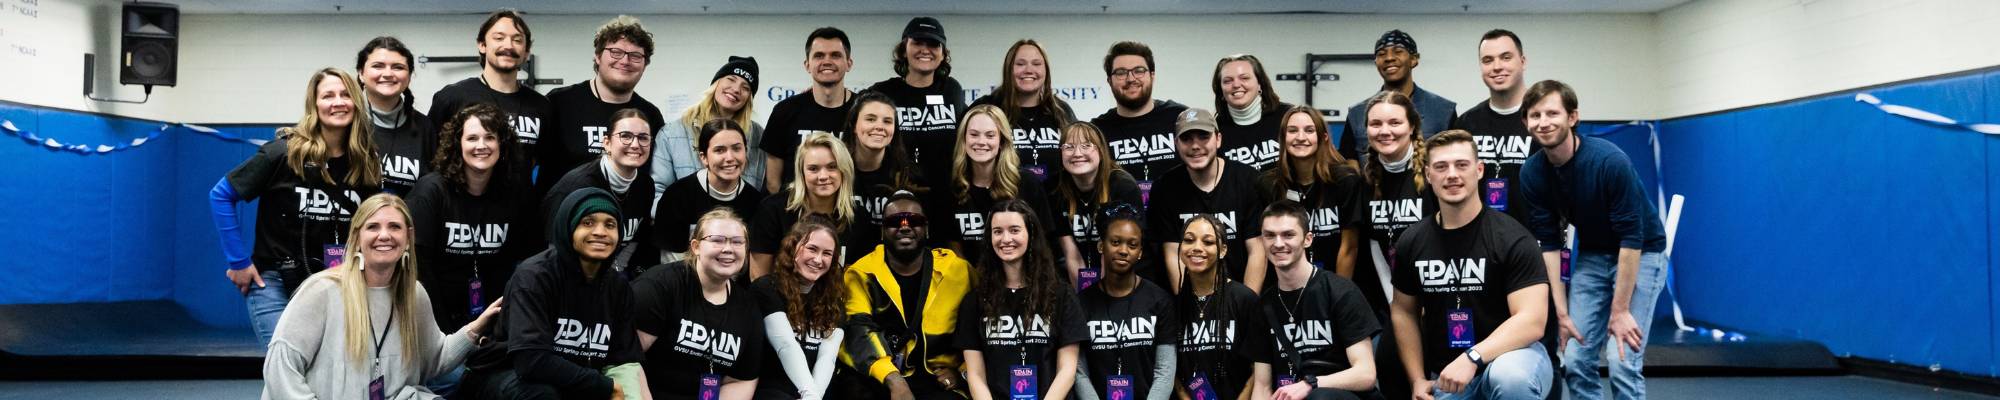 T-Pain group photo